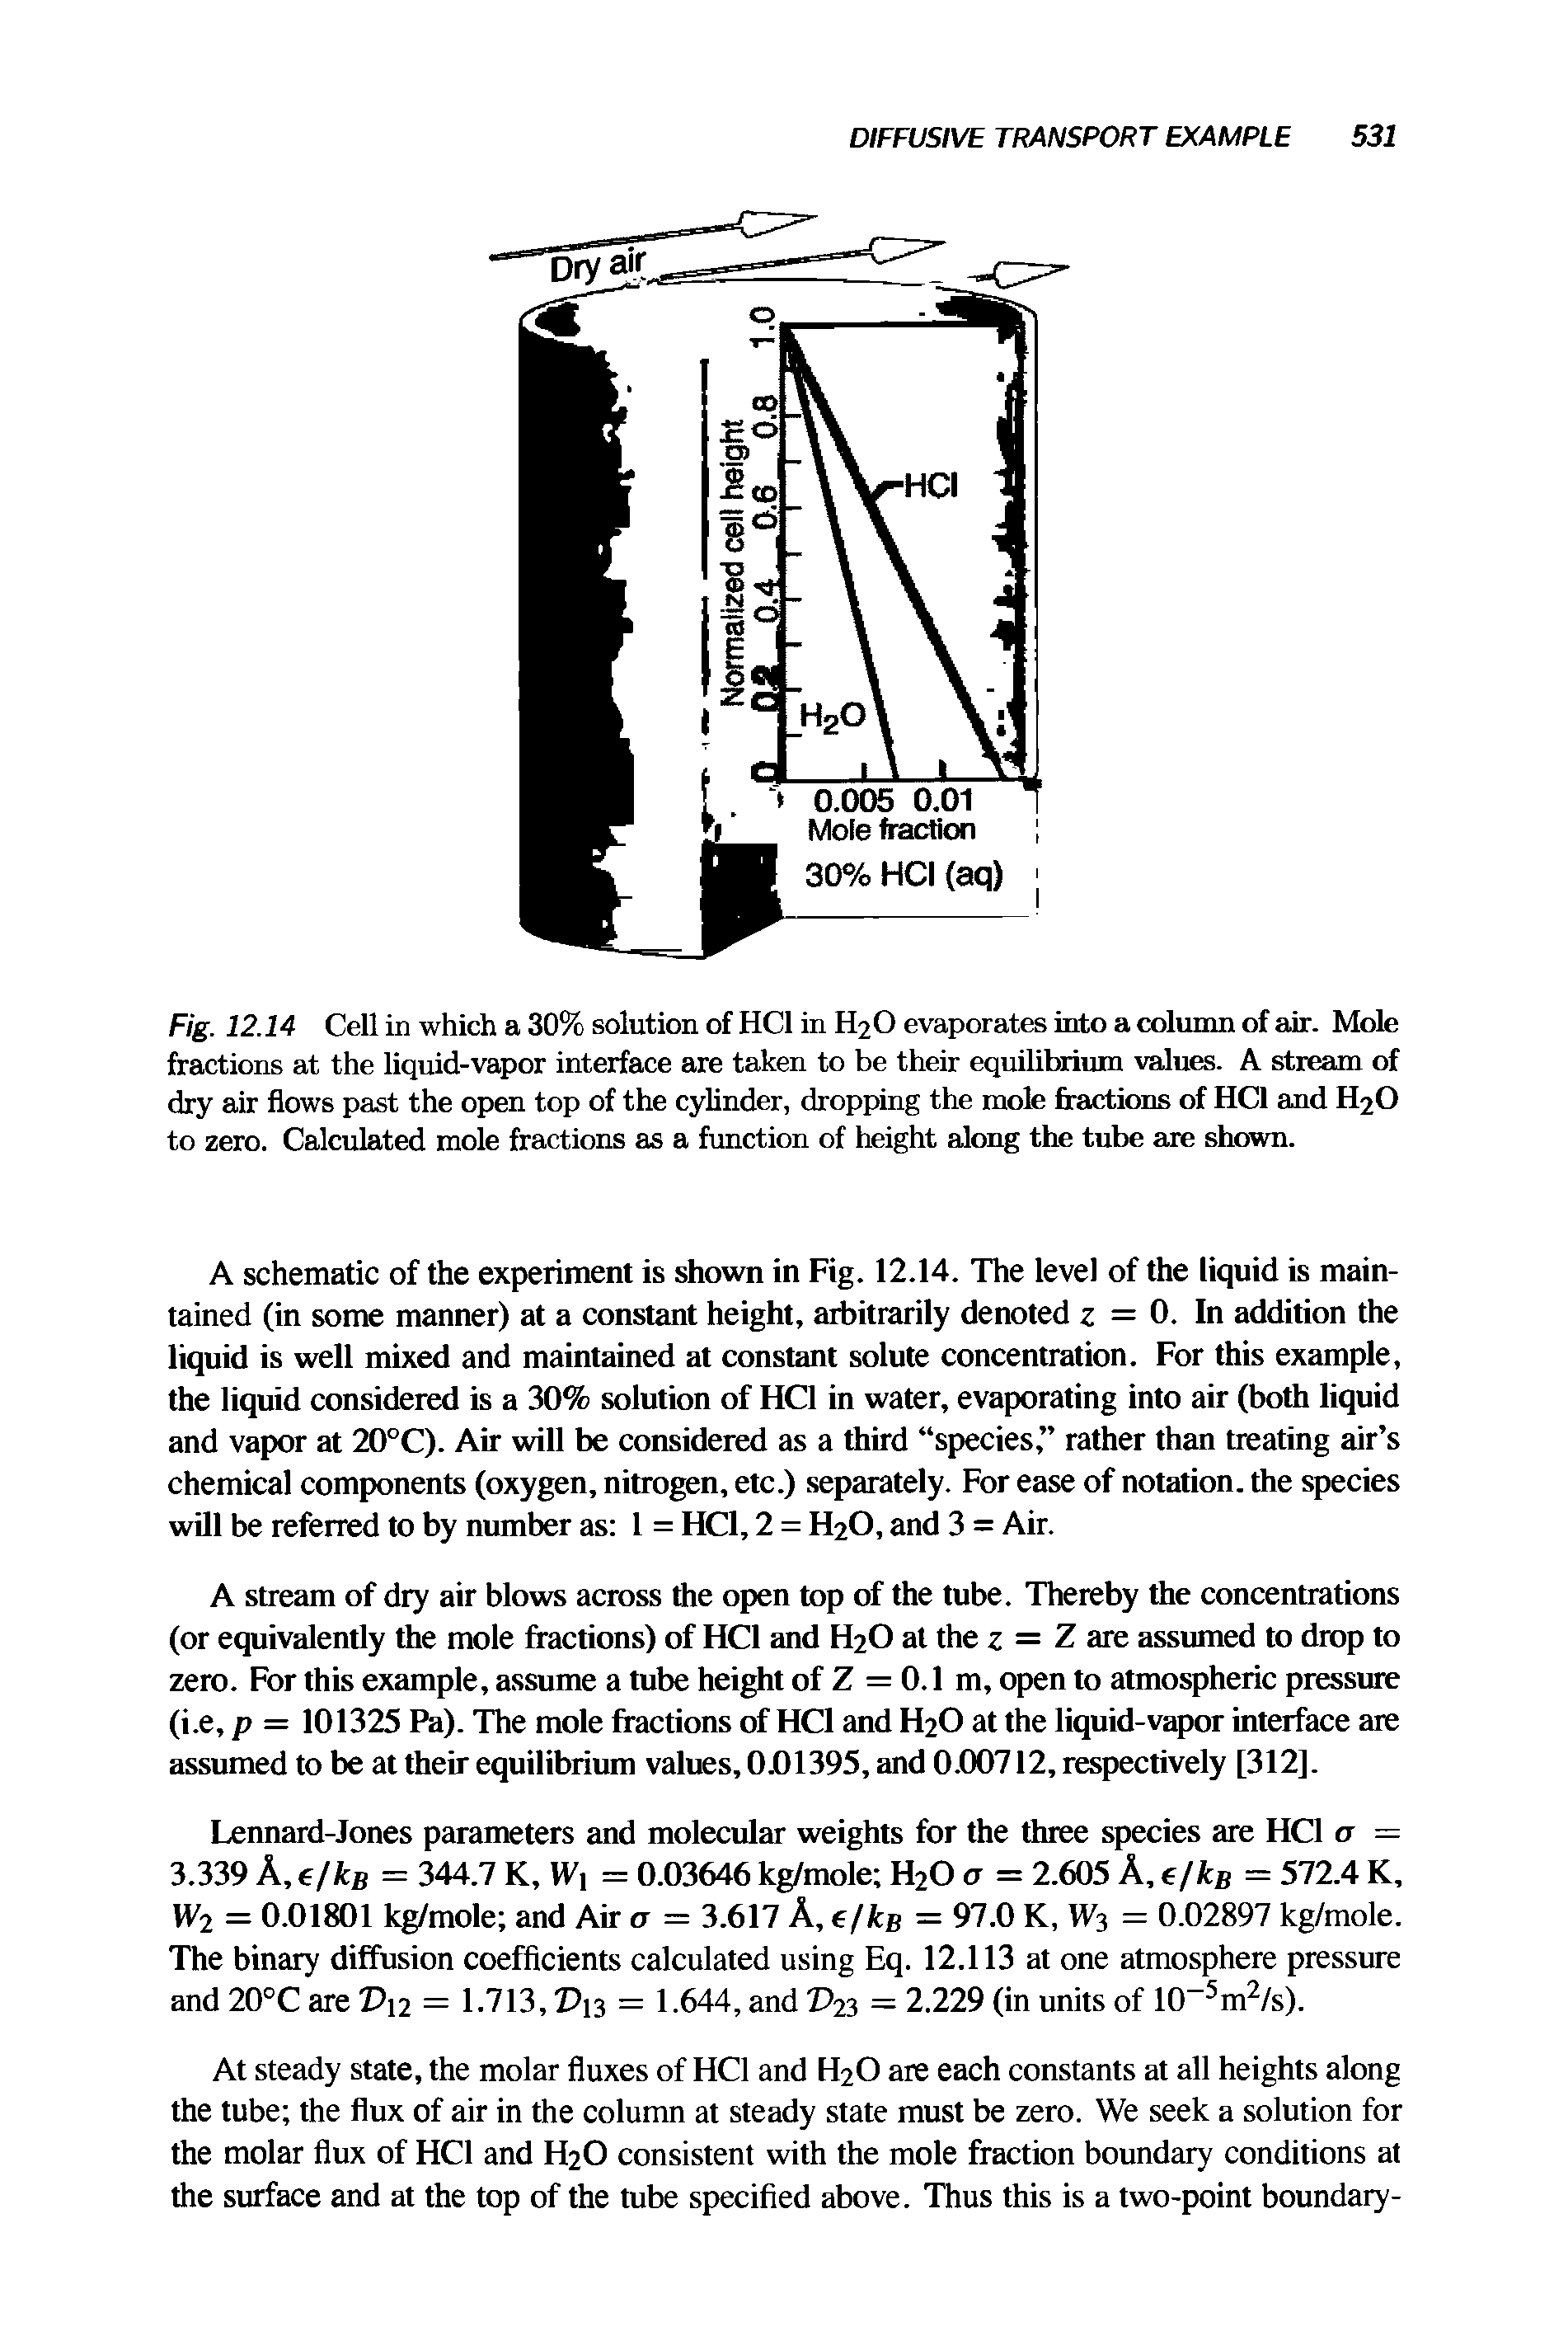 Fig. 12.14 Cell in which a 30% solution of HC1 in H2O evaporates into a column of air. Mole fractions at the liquid-vapor interface are taken to be their equilibrium values. A stream of dry air flows past the open top of the cylinder, dropping the mole fractions of HC1 and H2O to zero. Calculated mole fractions as a function of height along the tube are shown.